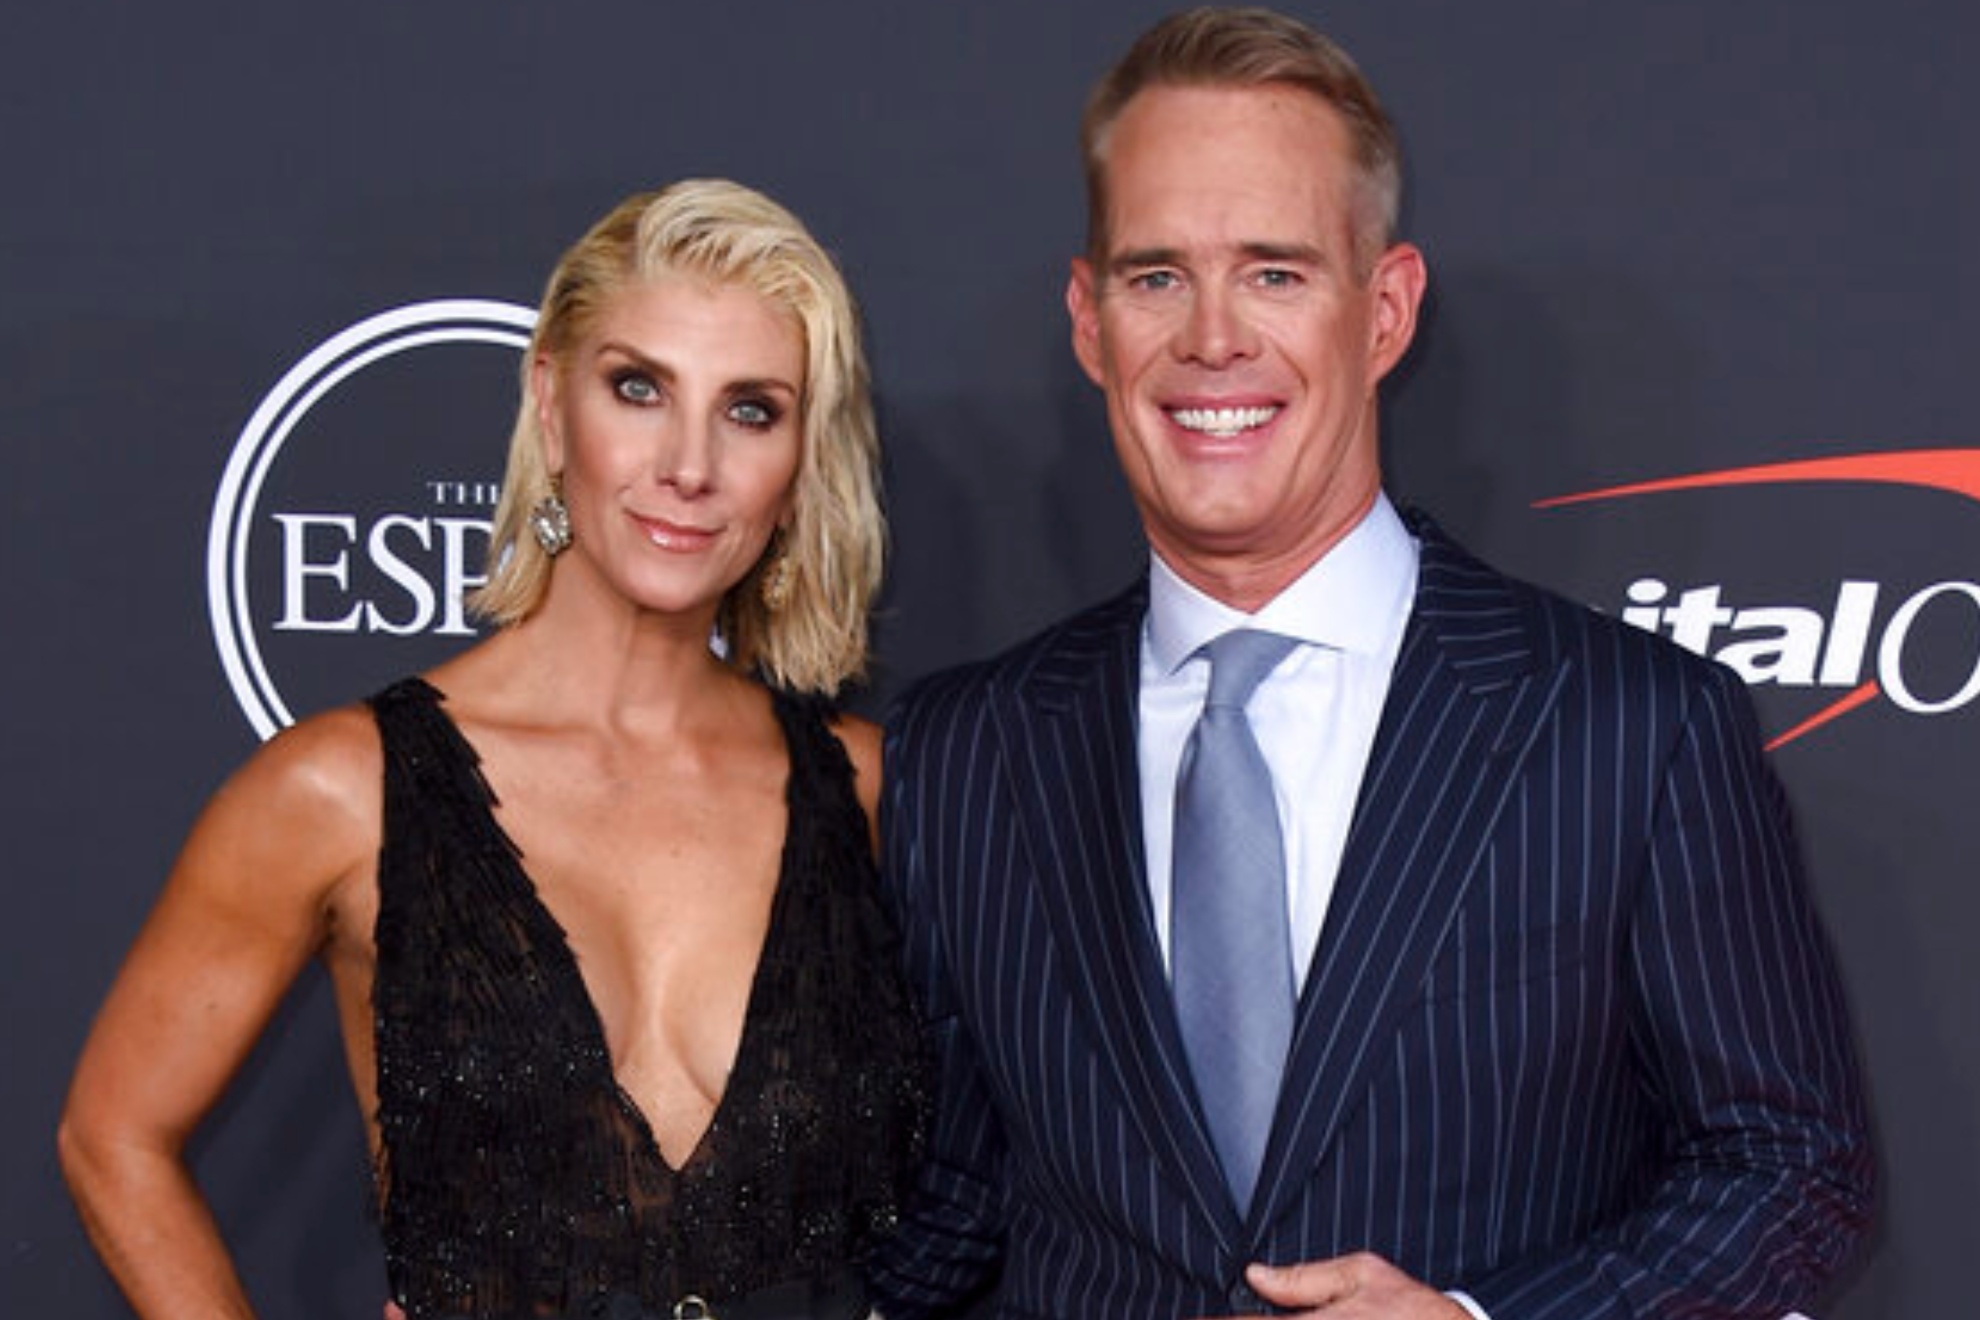 Married couple Joe Buck and Michelle Beisner-Buck set to host MNF pregame